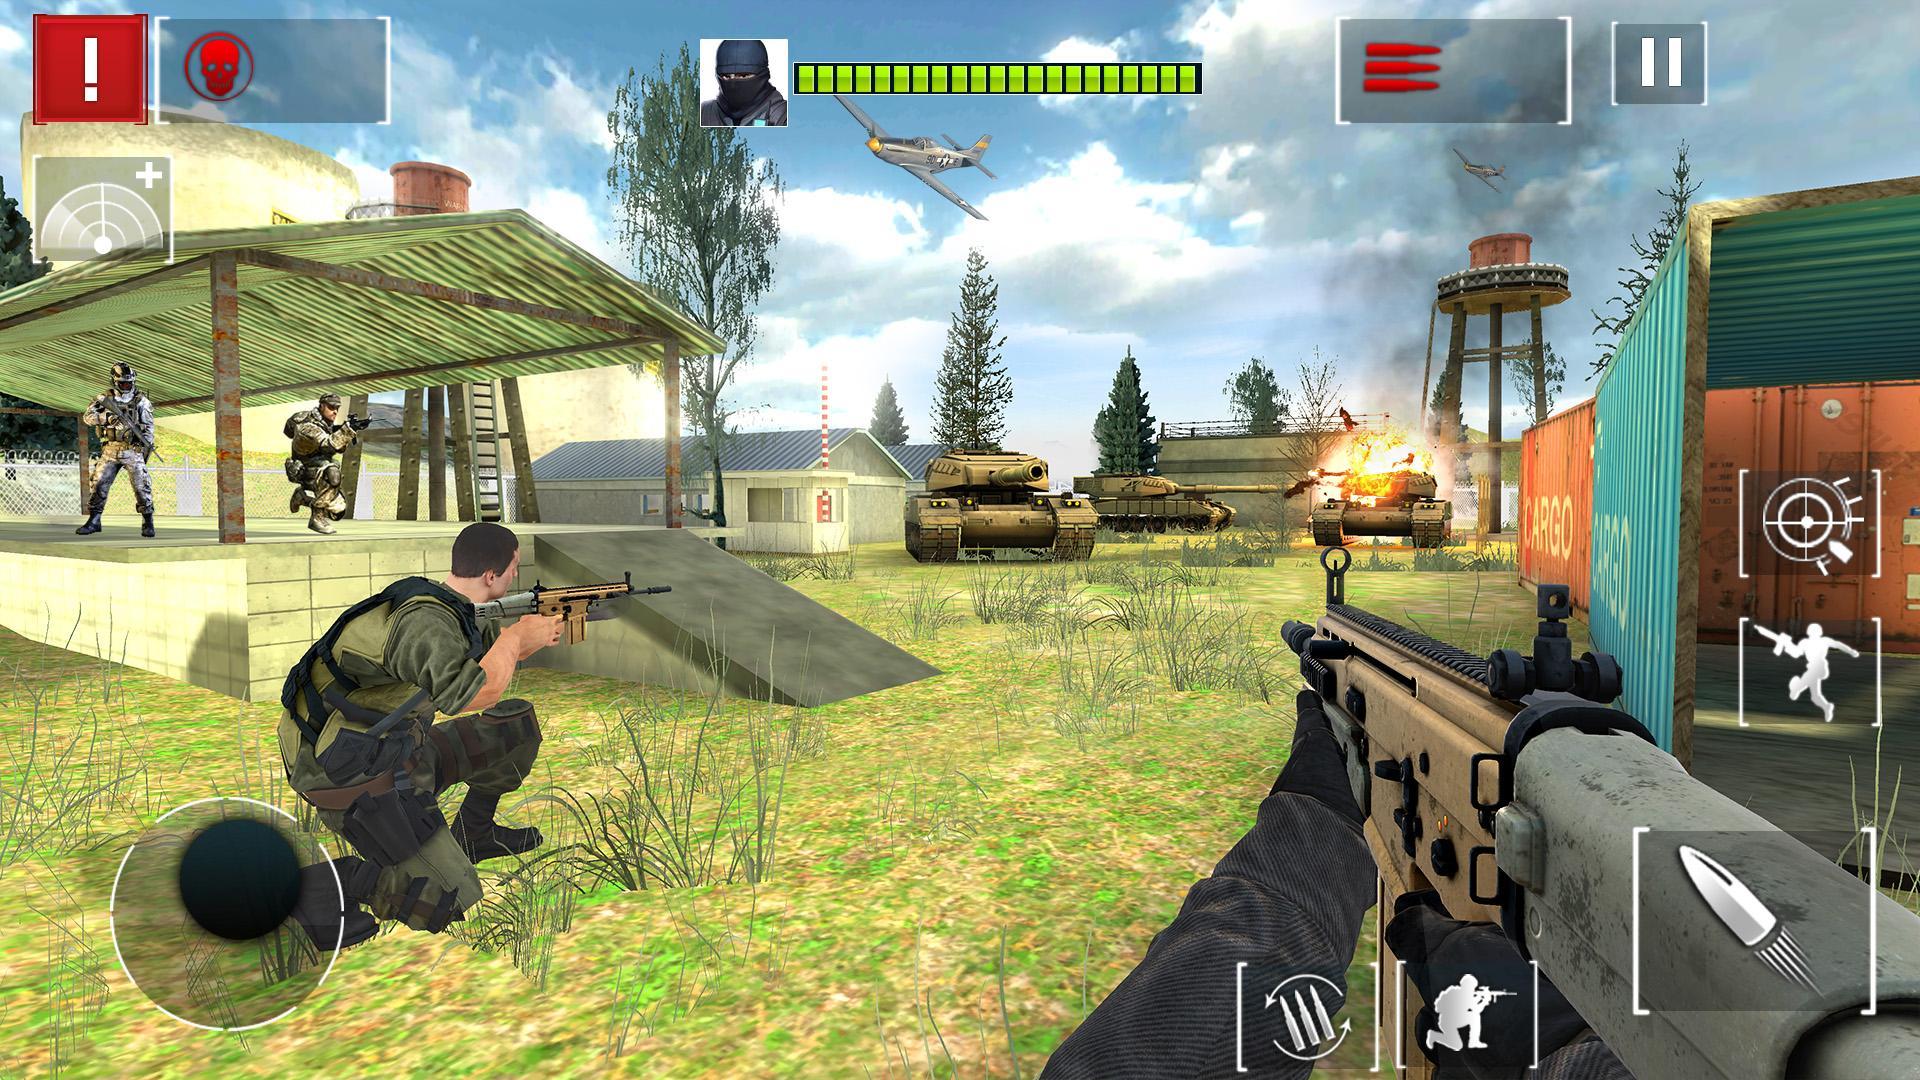 New Shooting Games 2020: Gun Games Offline for Android - APK Download